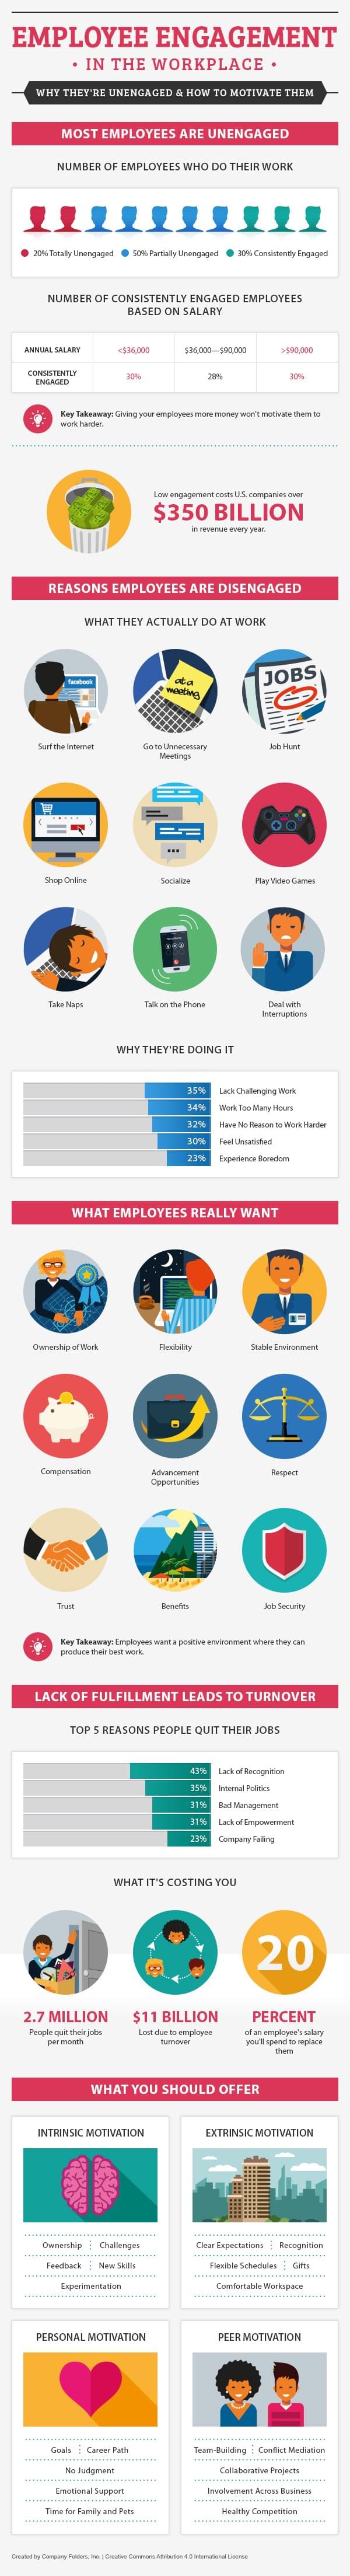 employee-engagement-in-the-workplace